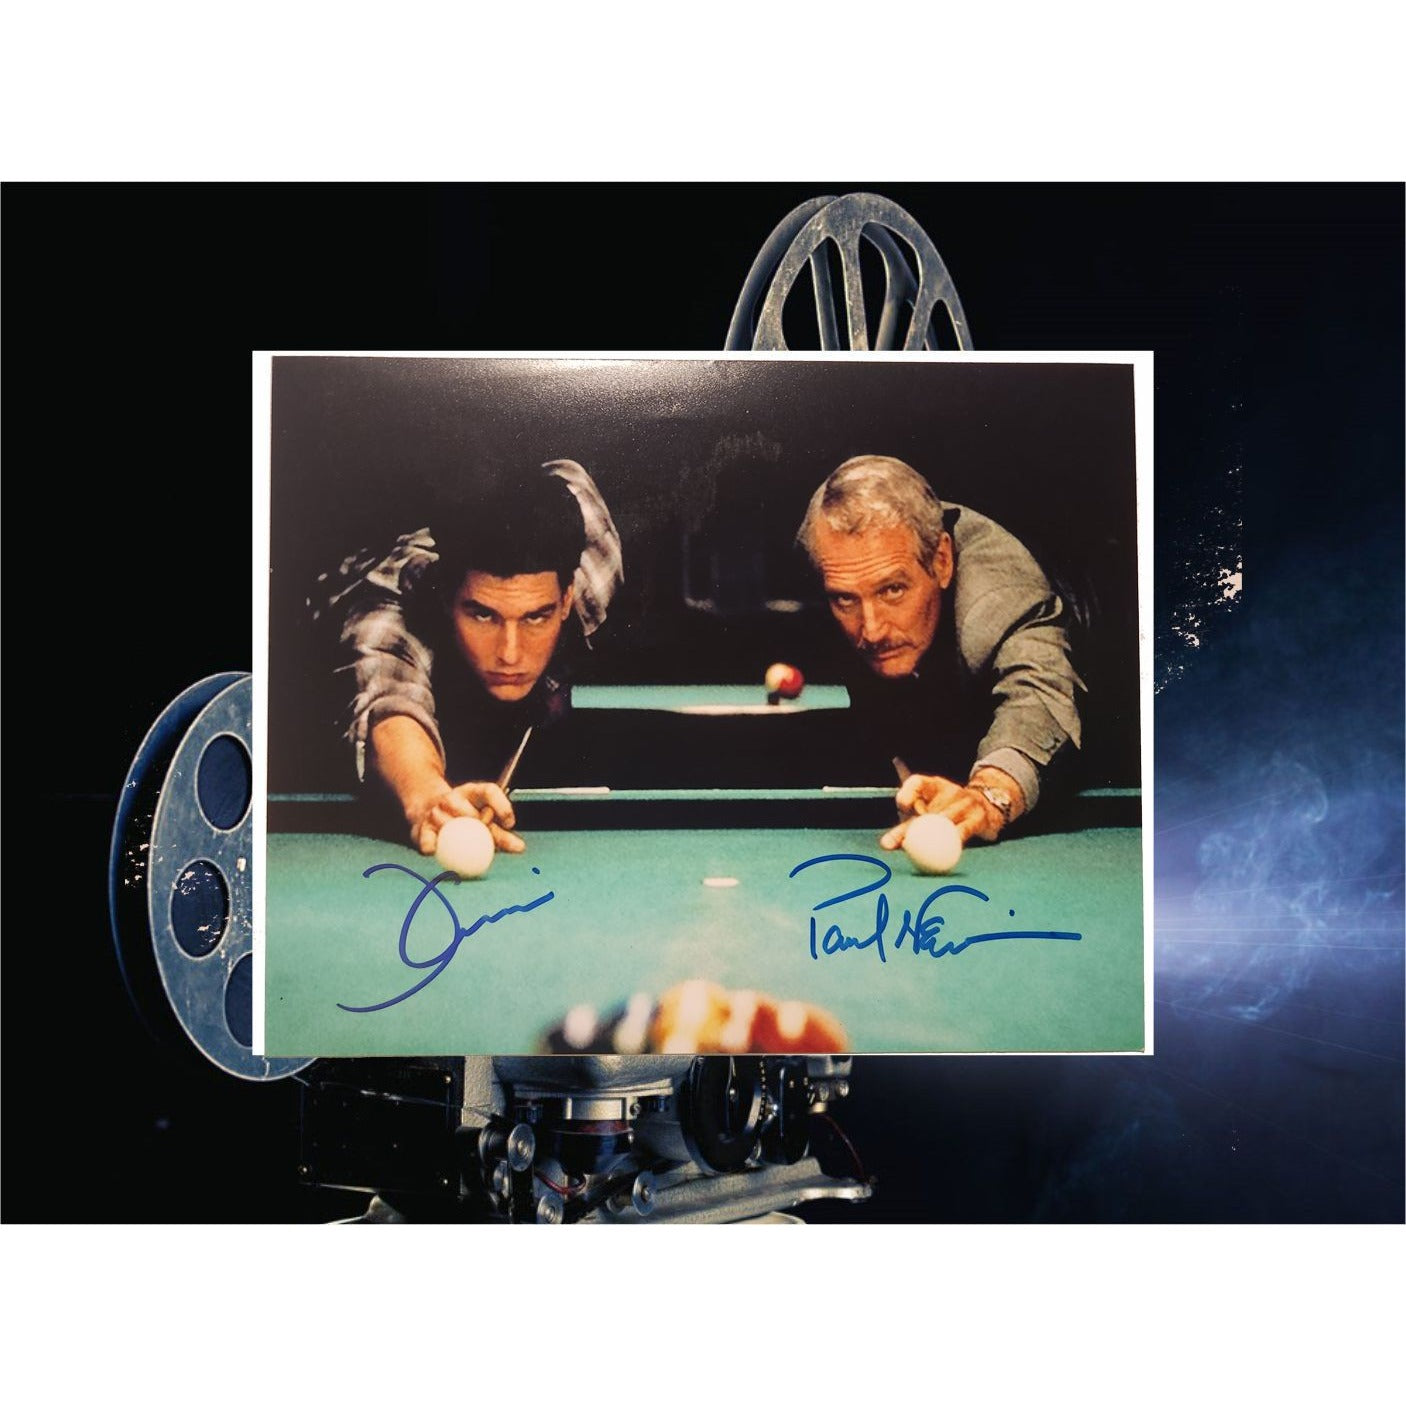 Paul Newman and Tom Cruise The Hustler 8 x 10 photo signed with proof